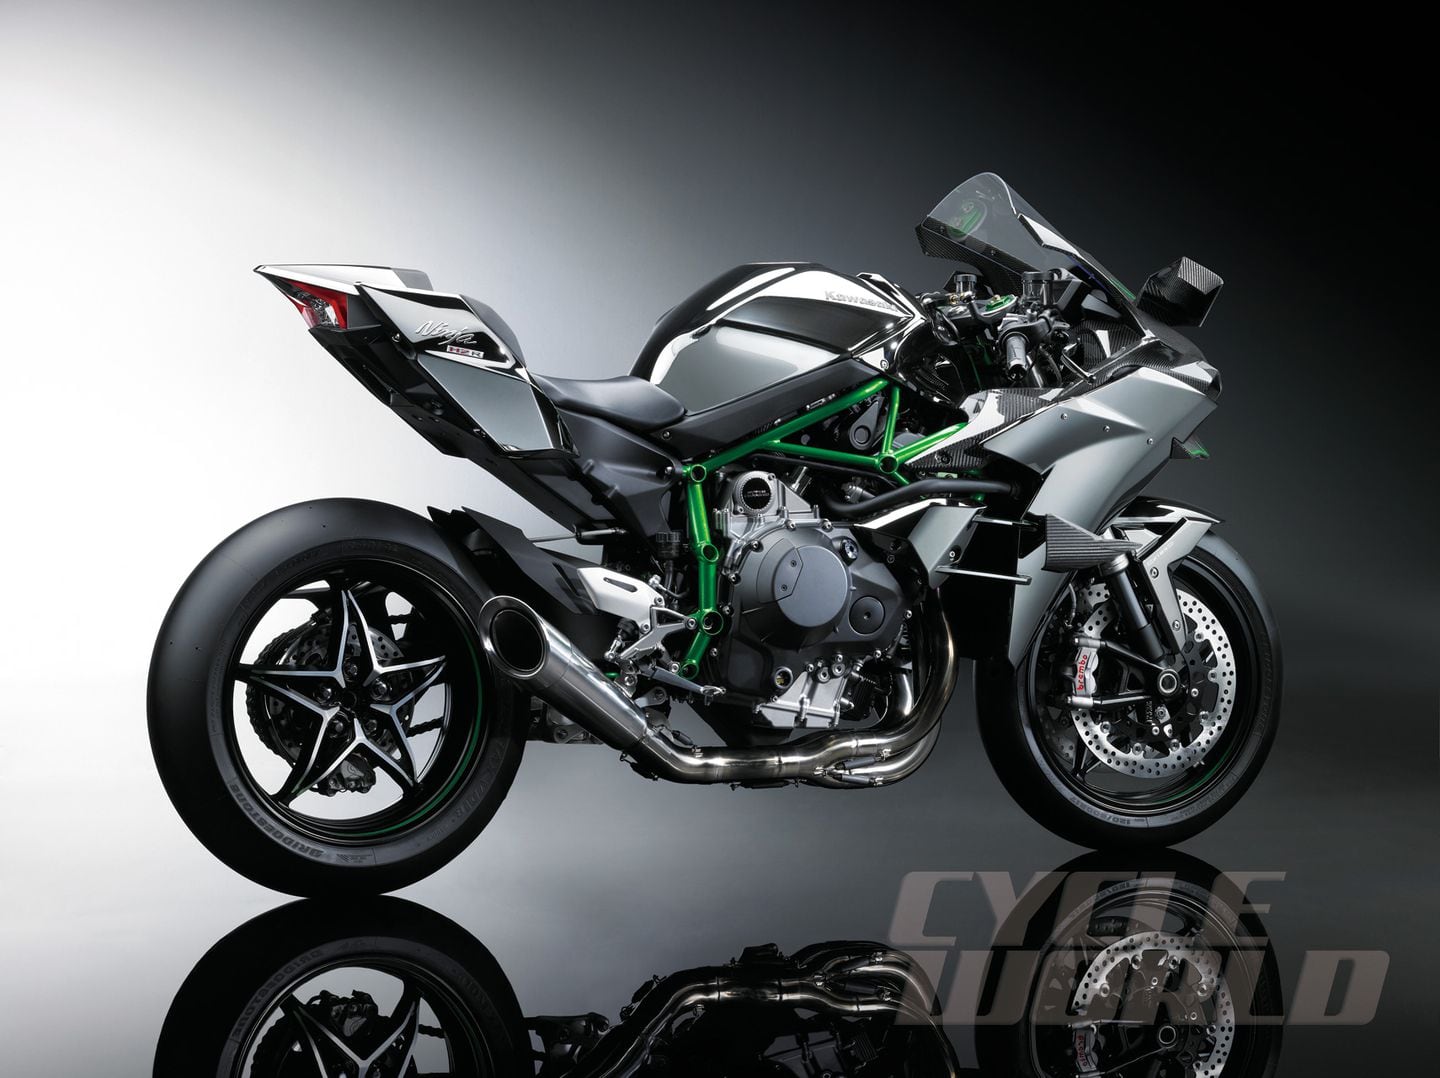 H2R vs. H2 Superbike Motorcycle Review | Cycle World